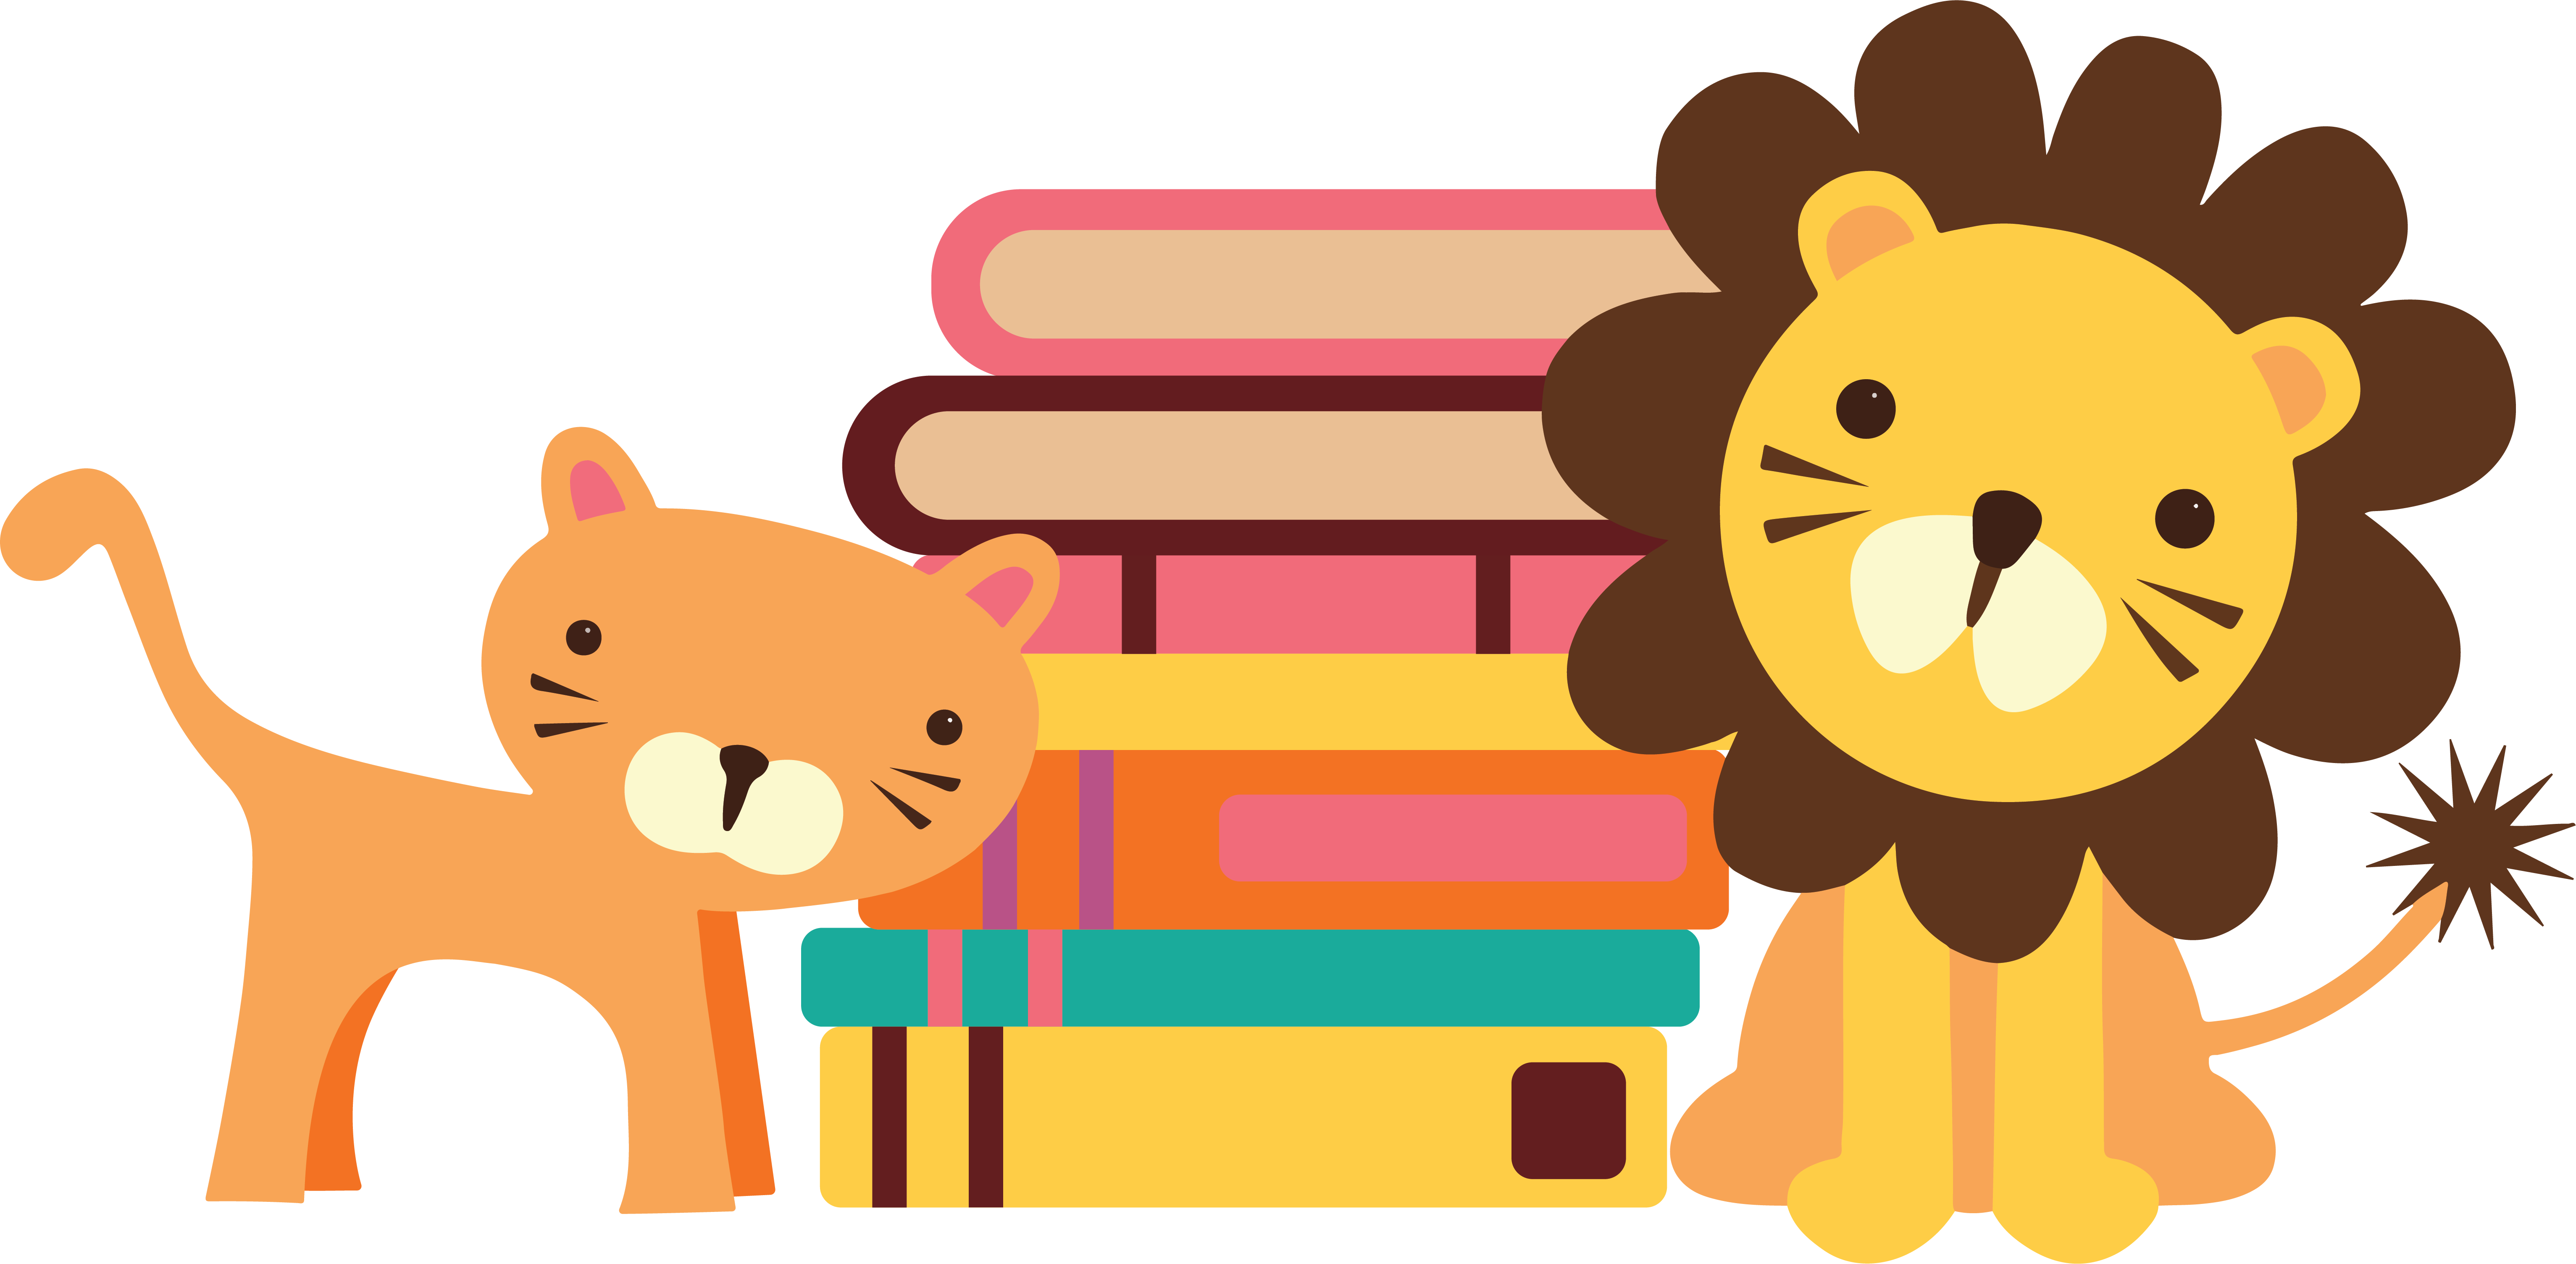 Toy tiger and lion next to stack of books